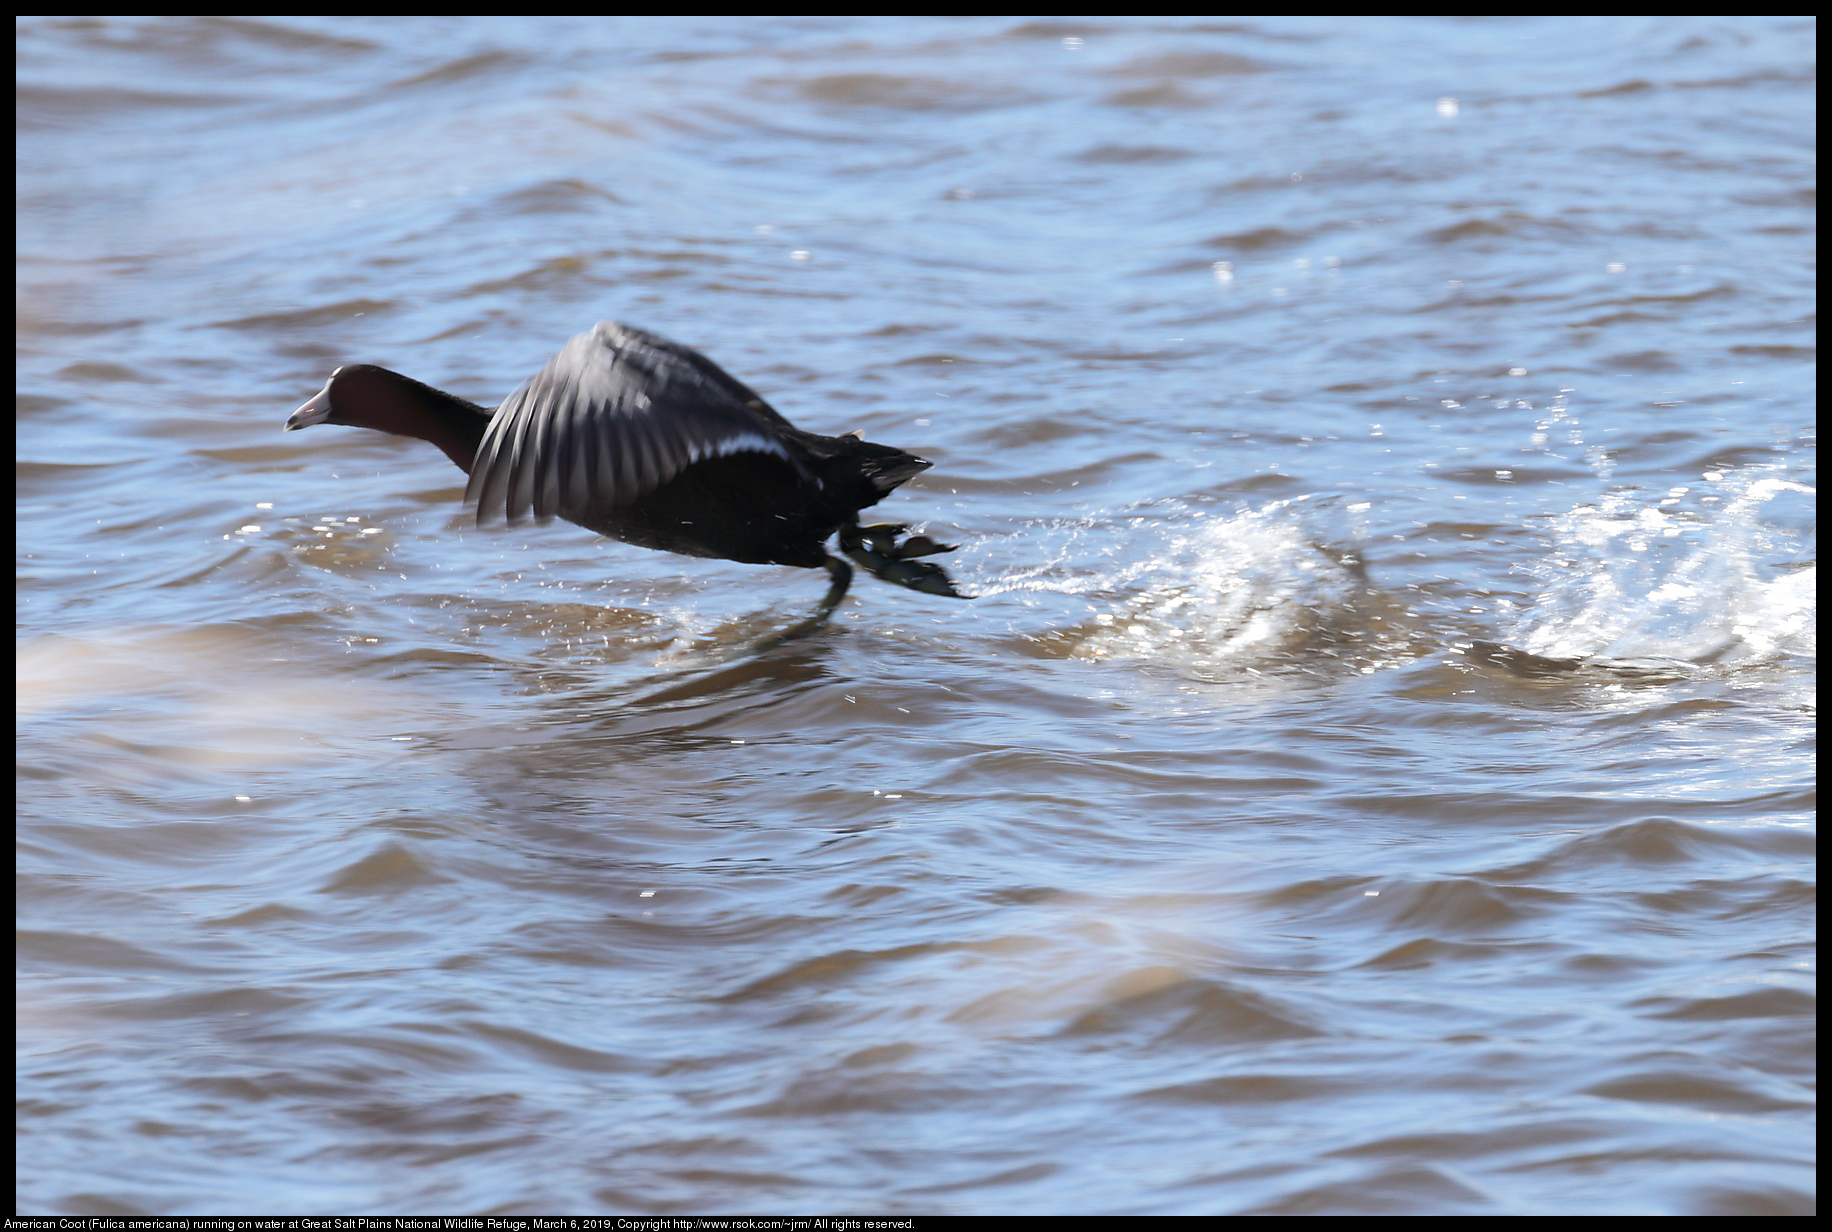 American Coot (Fulica americana) running on water at Great Salt Plains National Wildlife Refuge, March 6, 2019